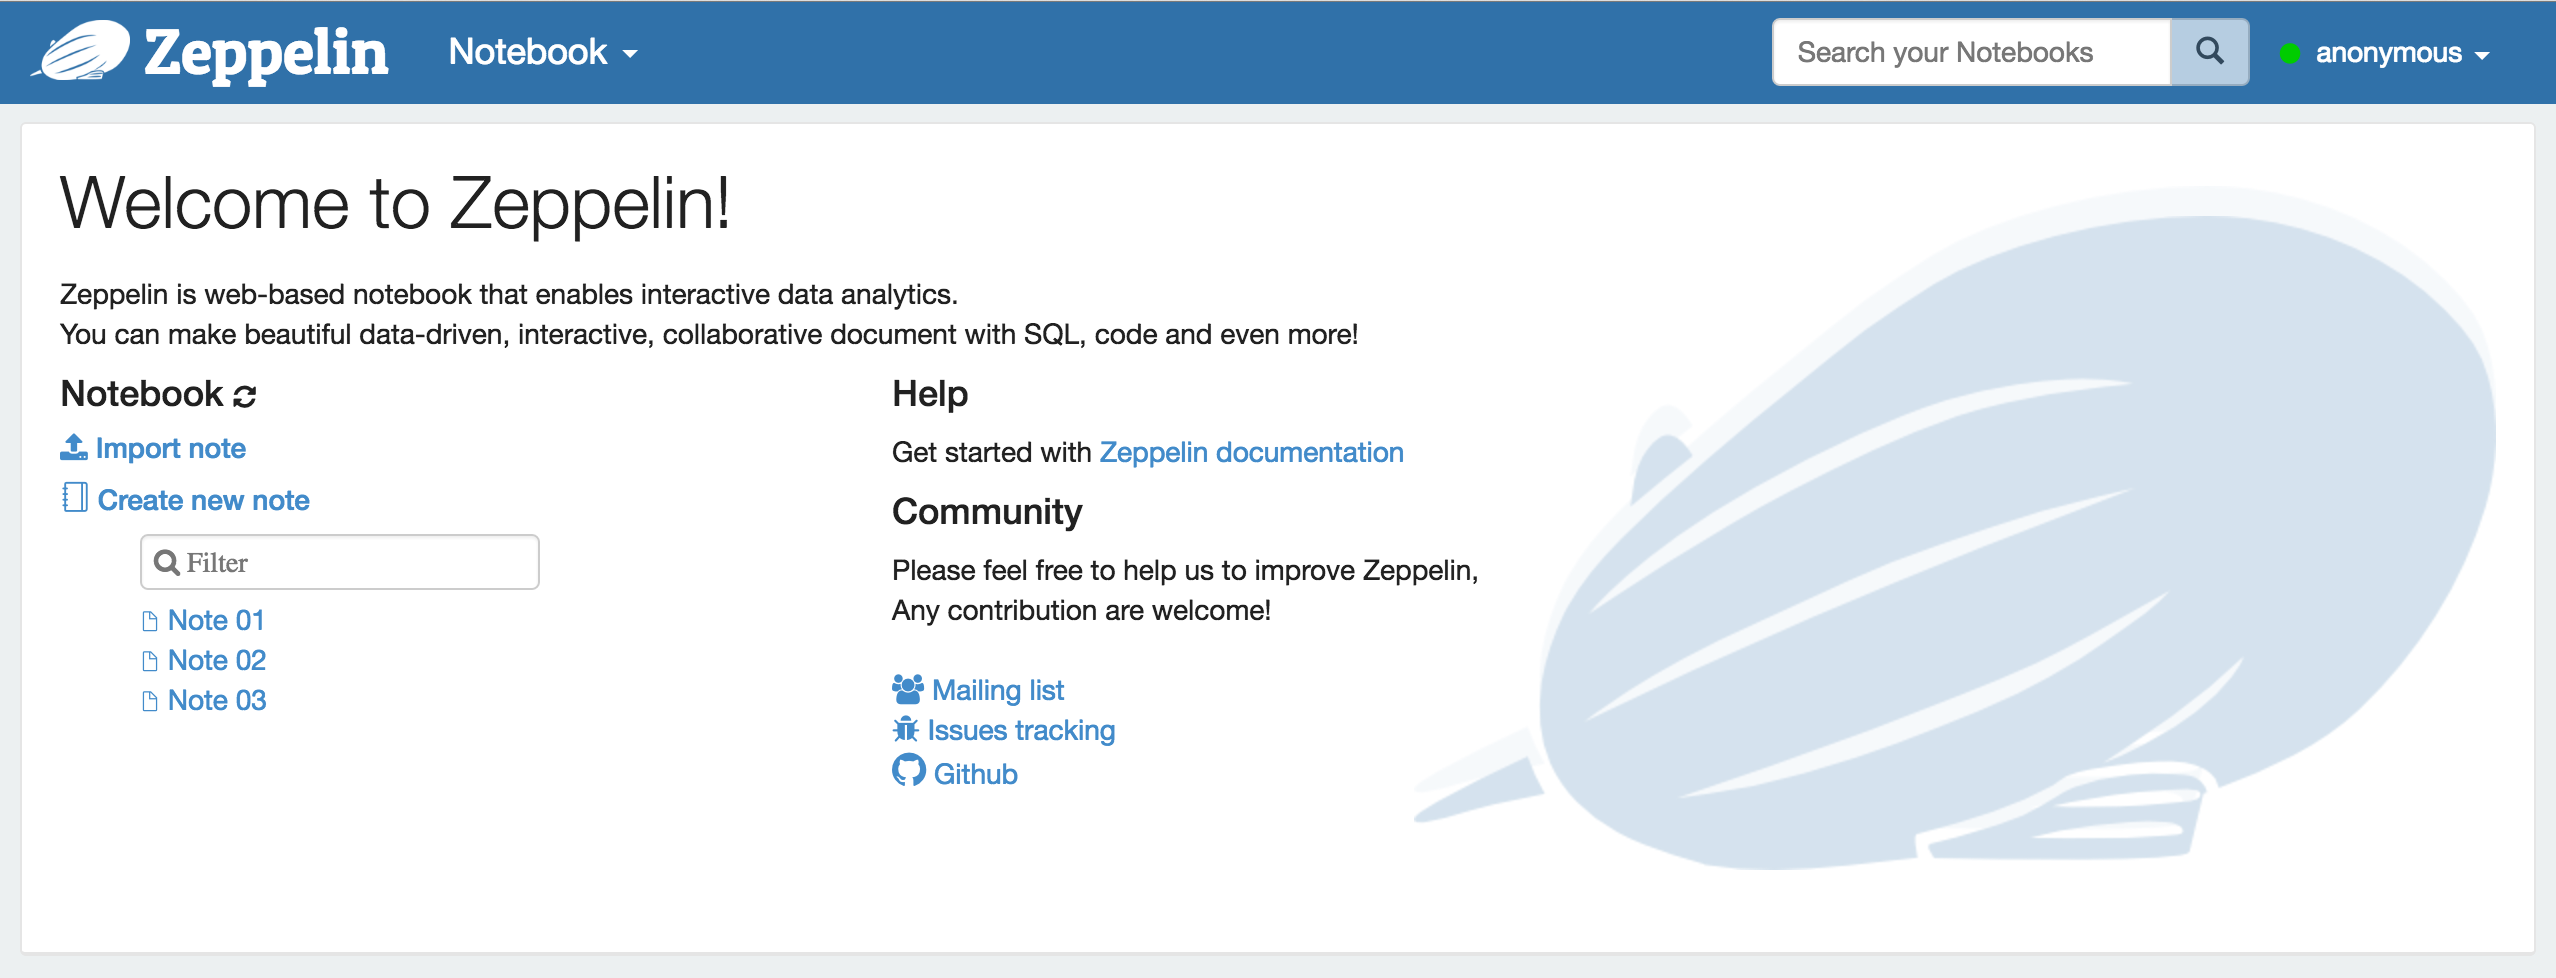 https://zeppelin.apache.org/docs/0.10.0/assets/themes/zeppelin/img/ui-img/homepage.png